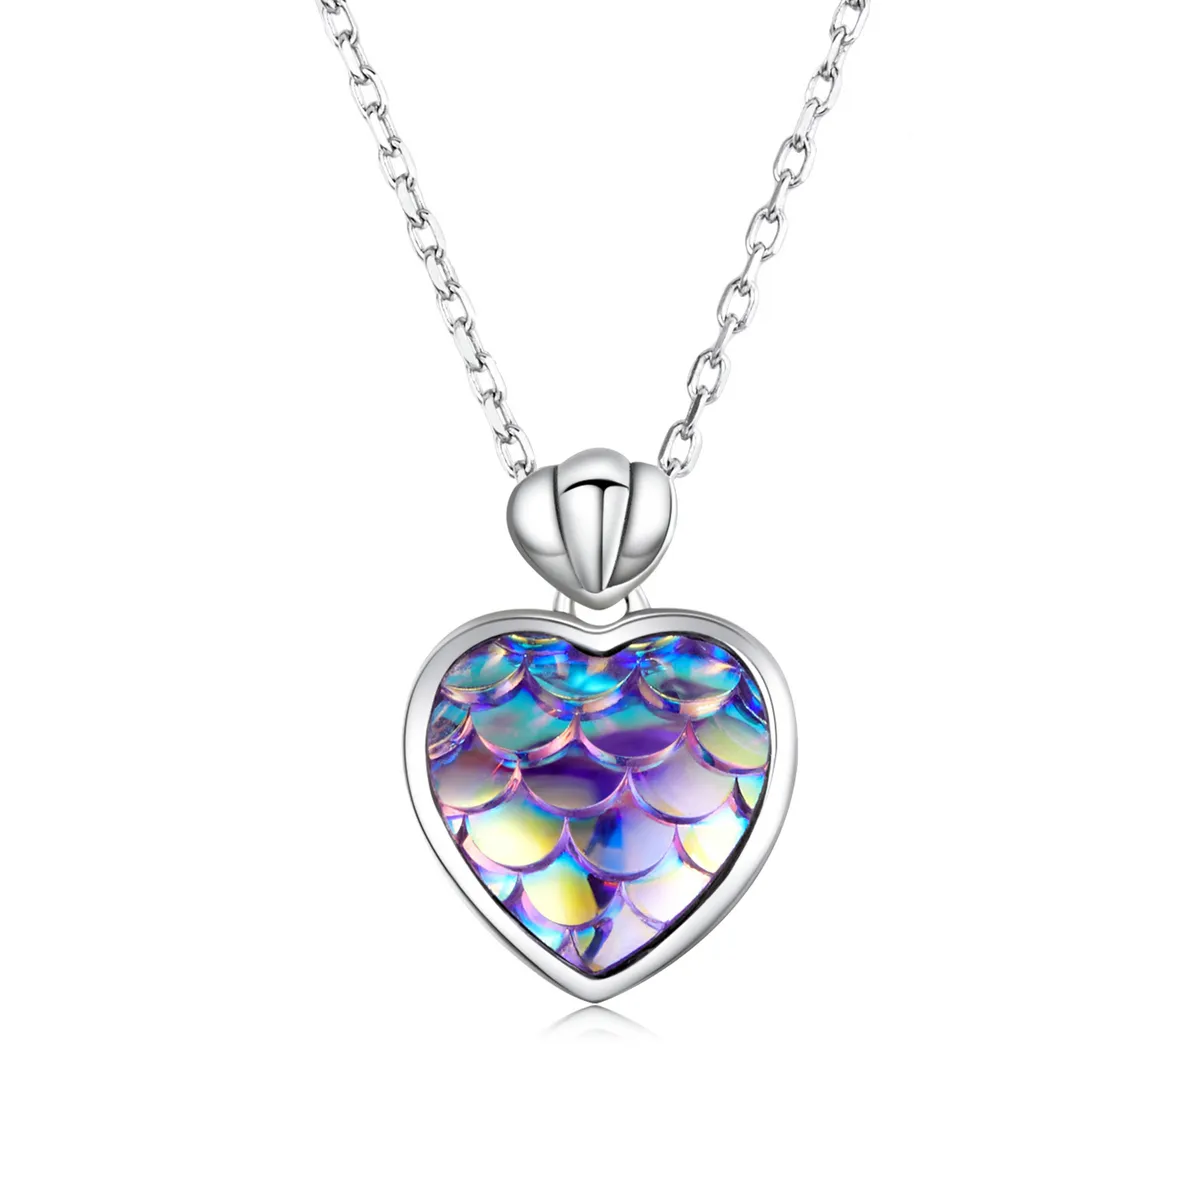 Pandora Style Fish Scale Heart Necklace - SCN468